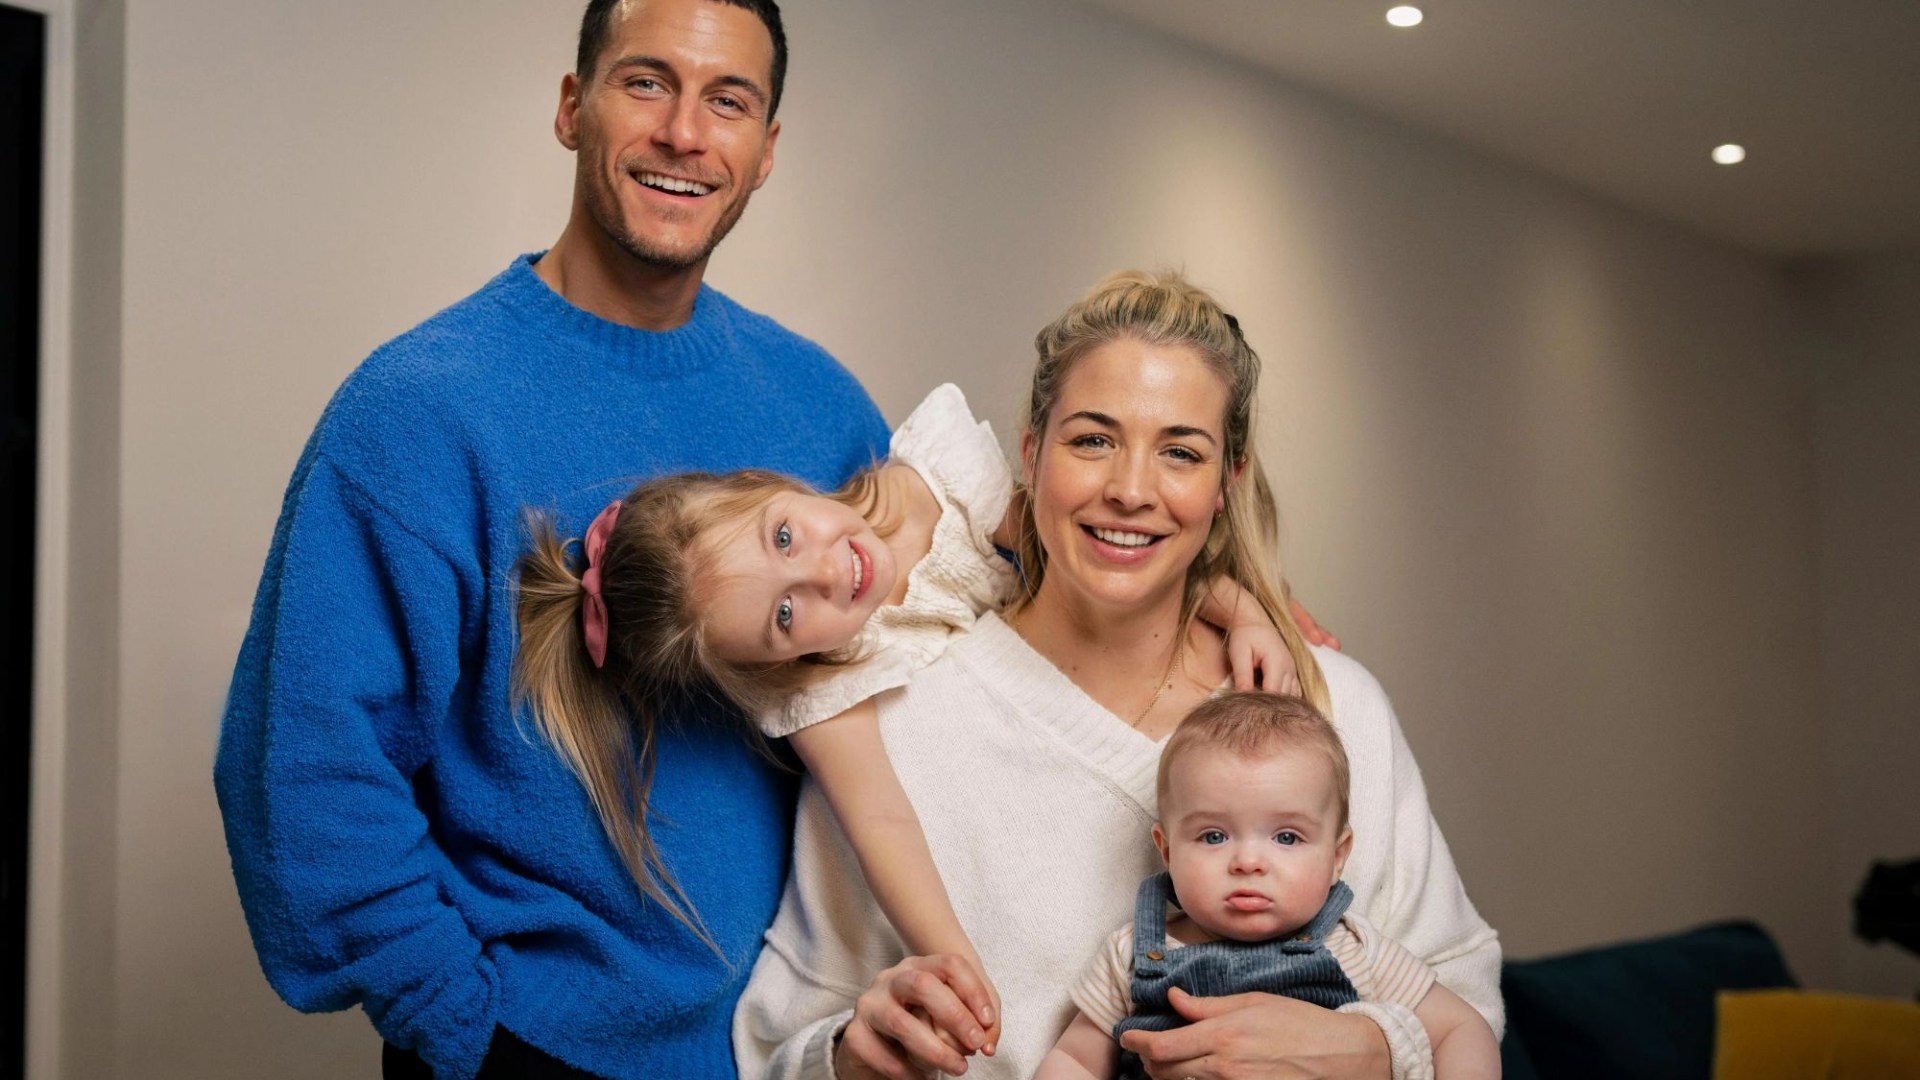 Exclusive: Gemma Atkinson and Gorka Marquez’s Second TV Series Announcement After Overcoming Relationship Hurdles